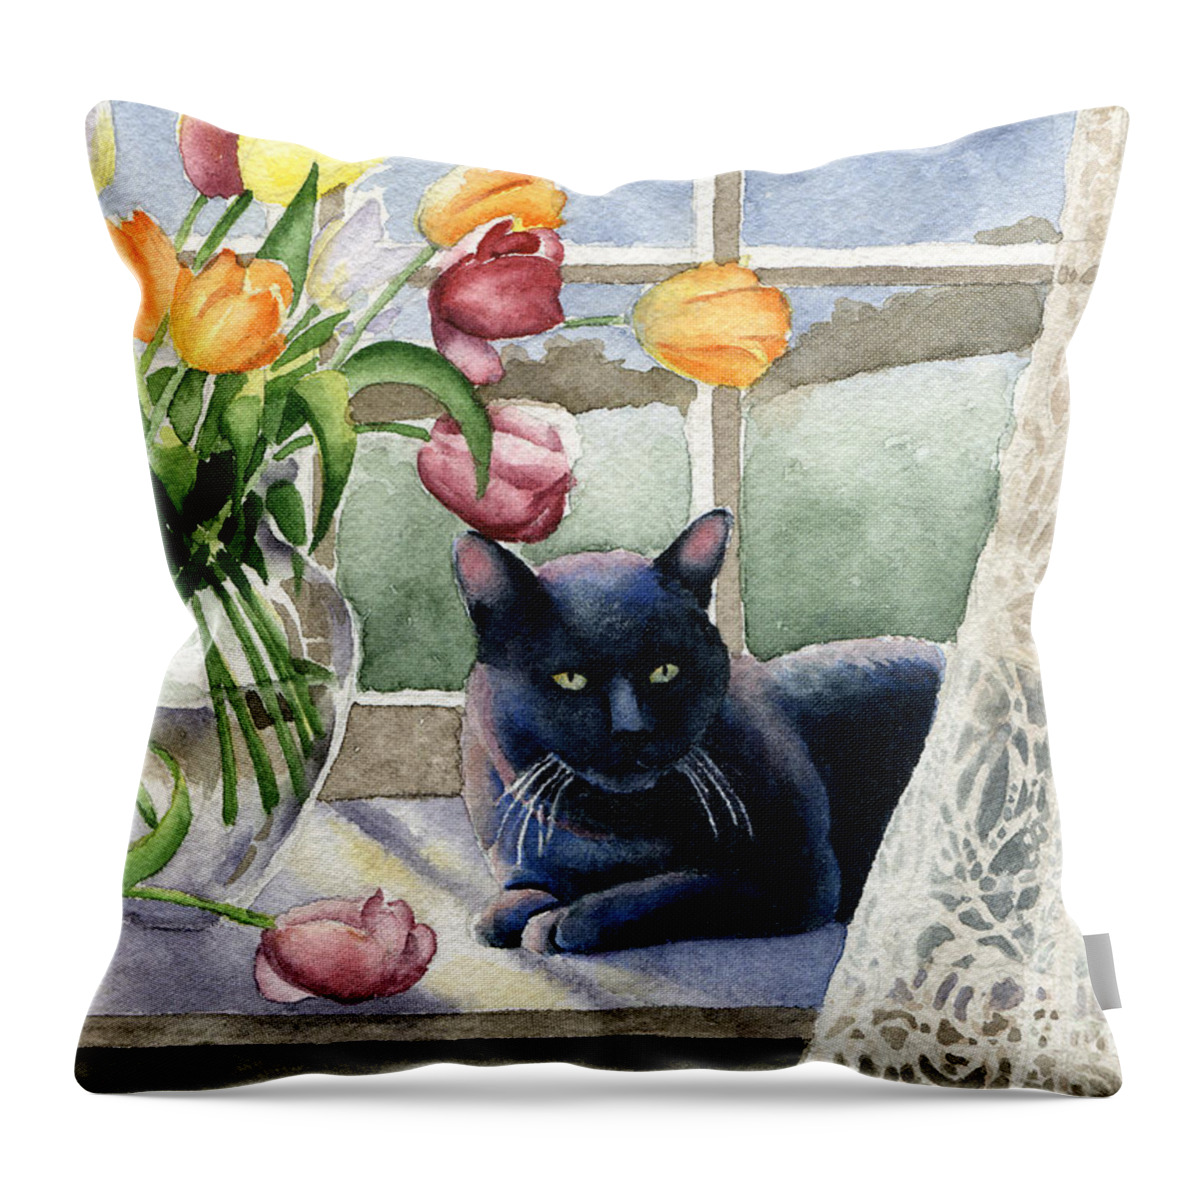 Black Throw Pillow featuring the painting Black Cat In The Window by David Rogers